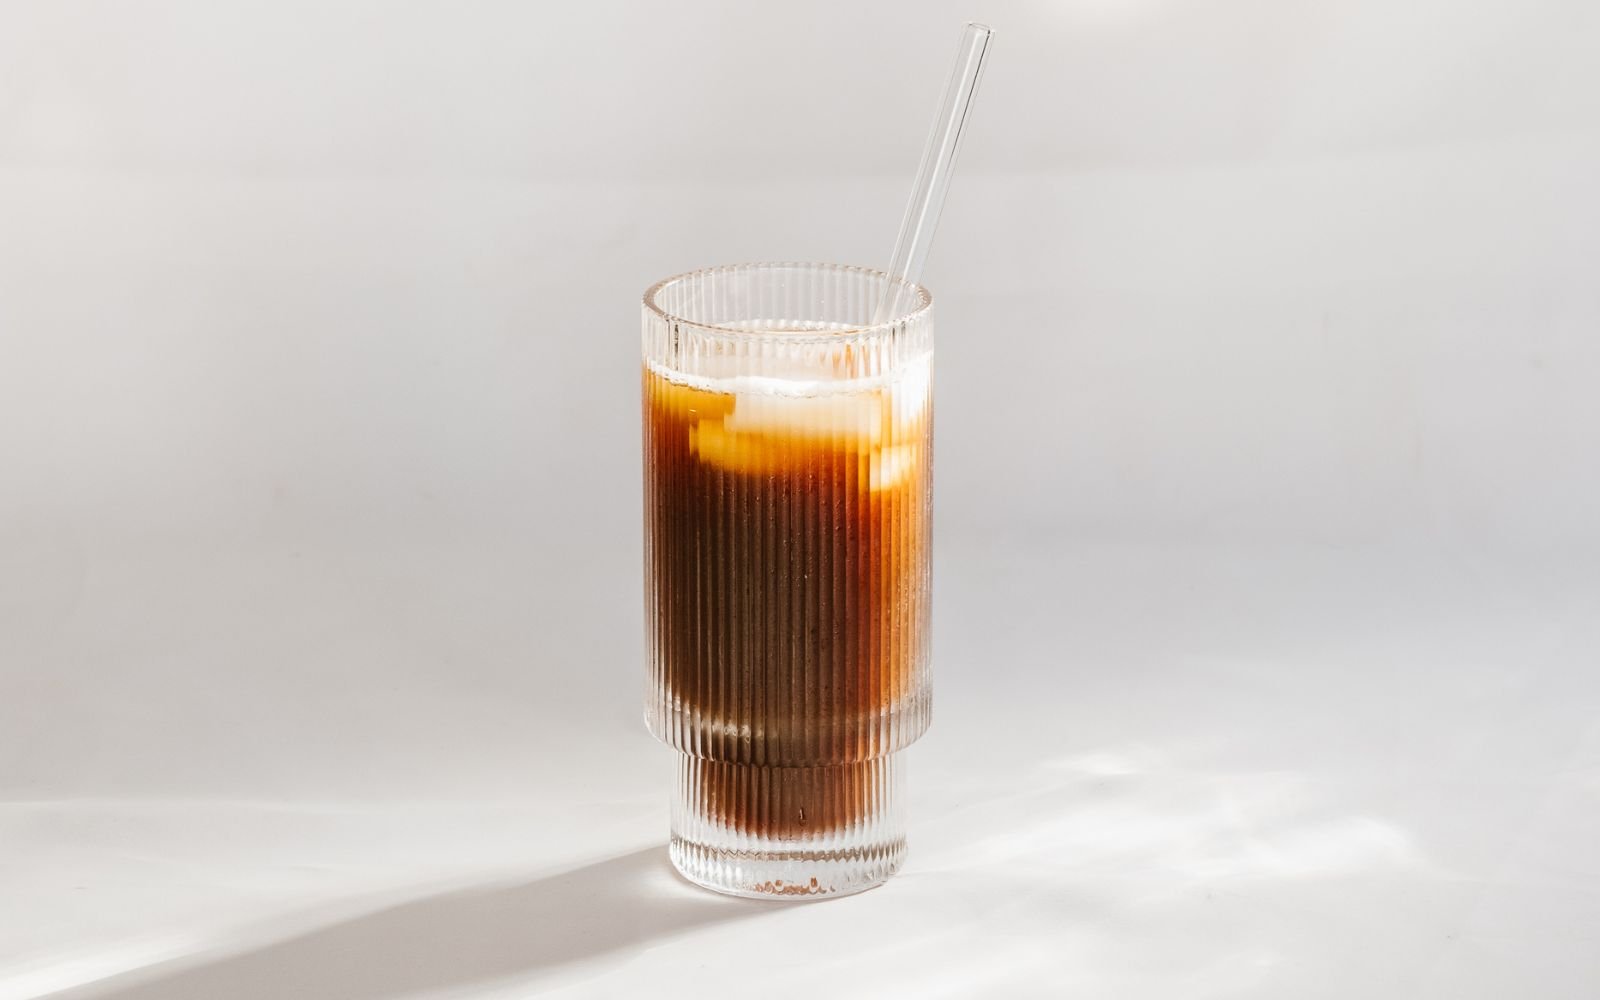 Japanese Iced Coffee is the Fastest, Easiest Way to Make Iced Coffee At  Home